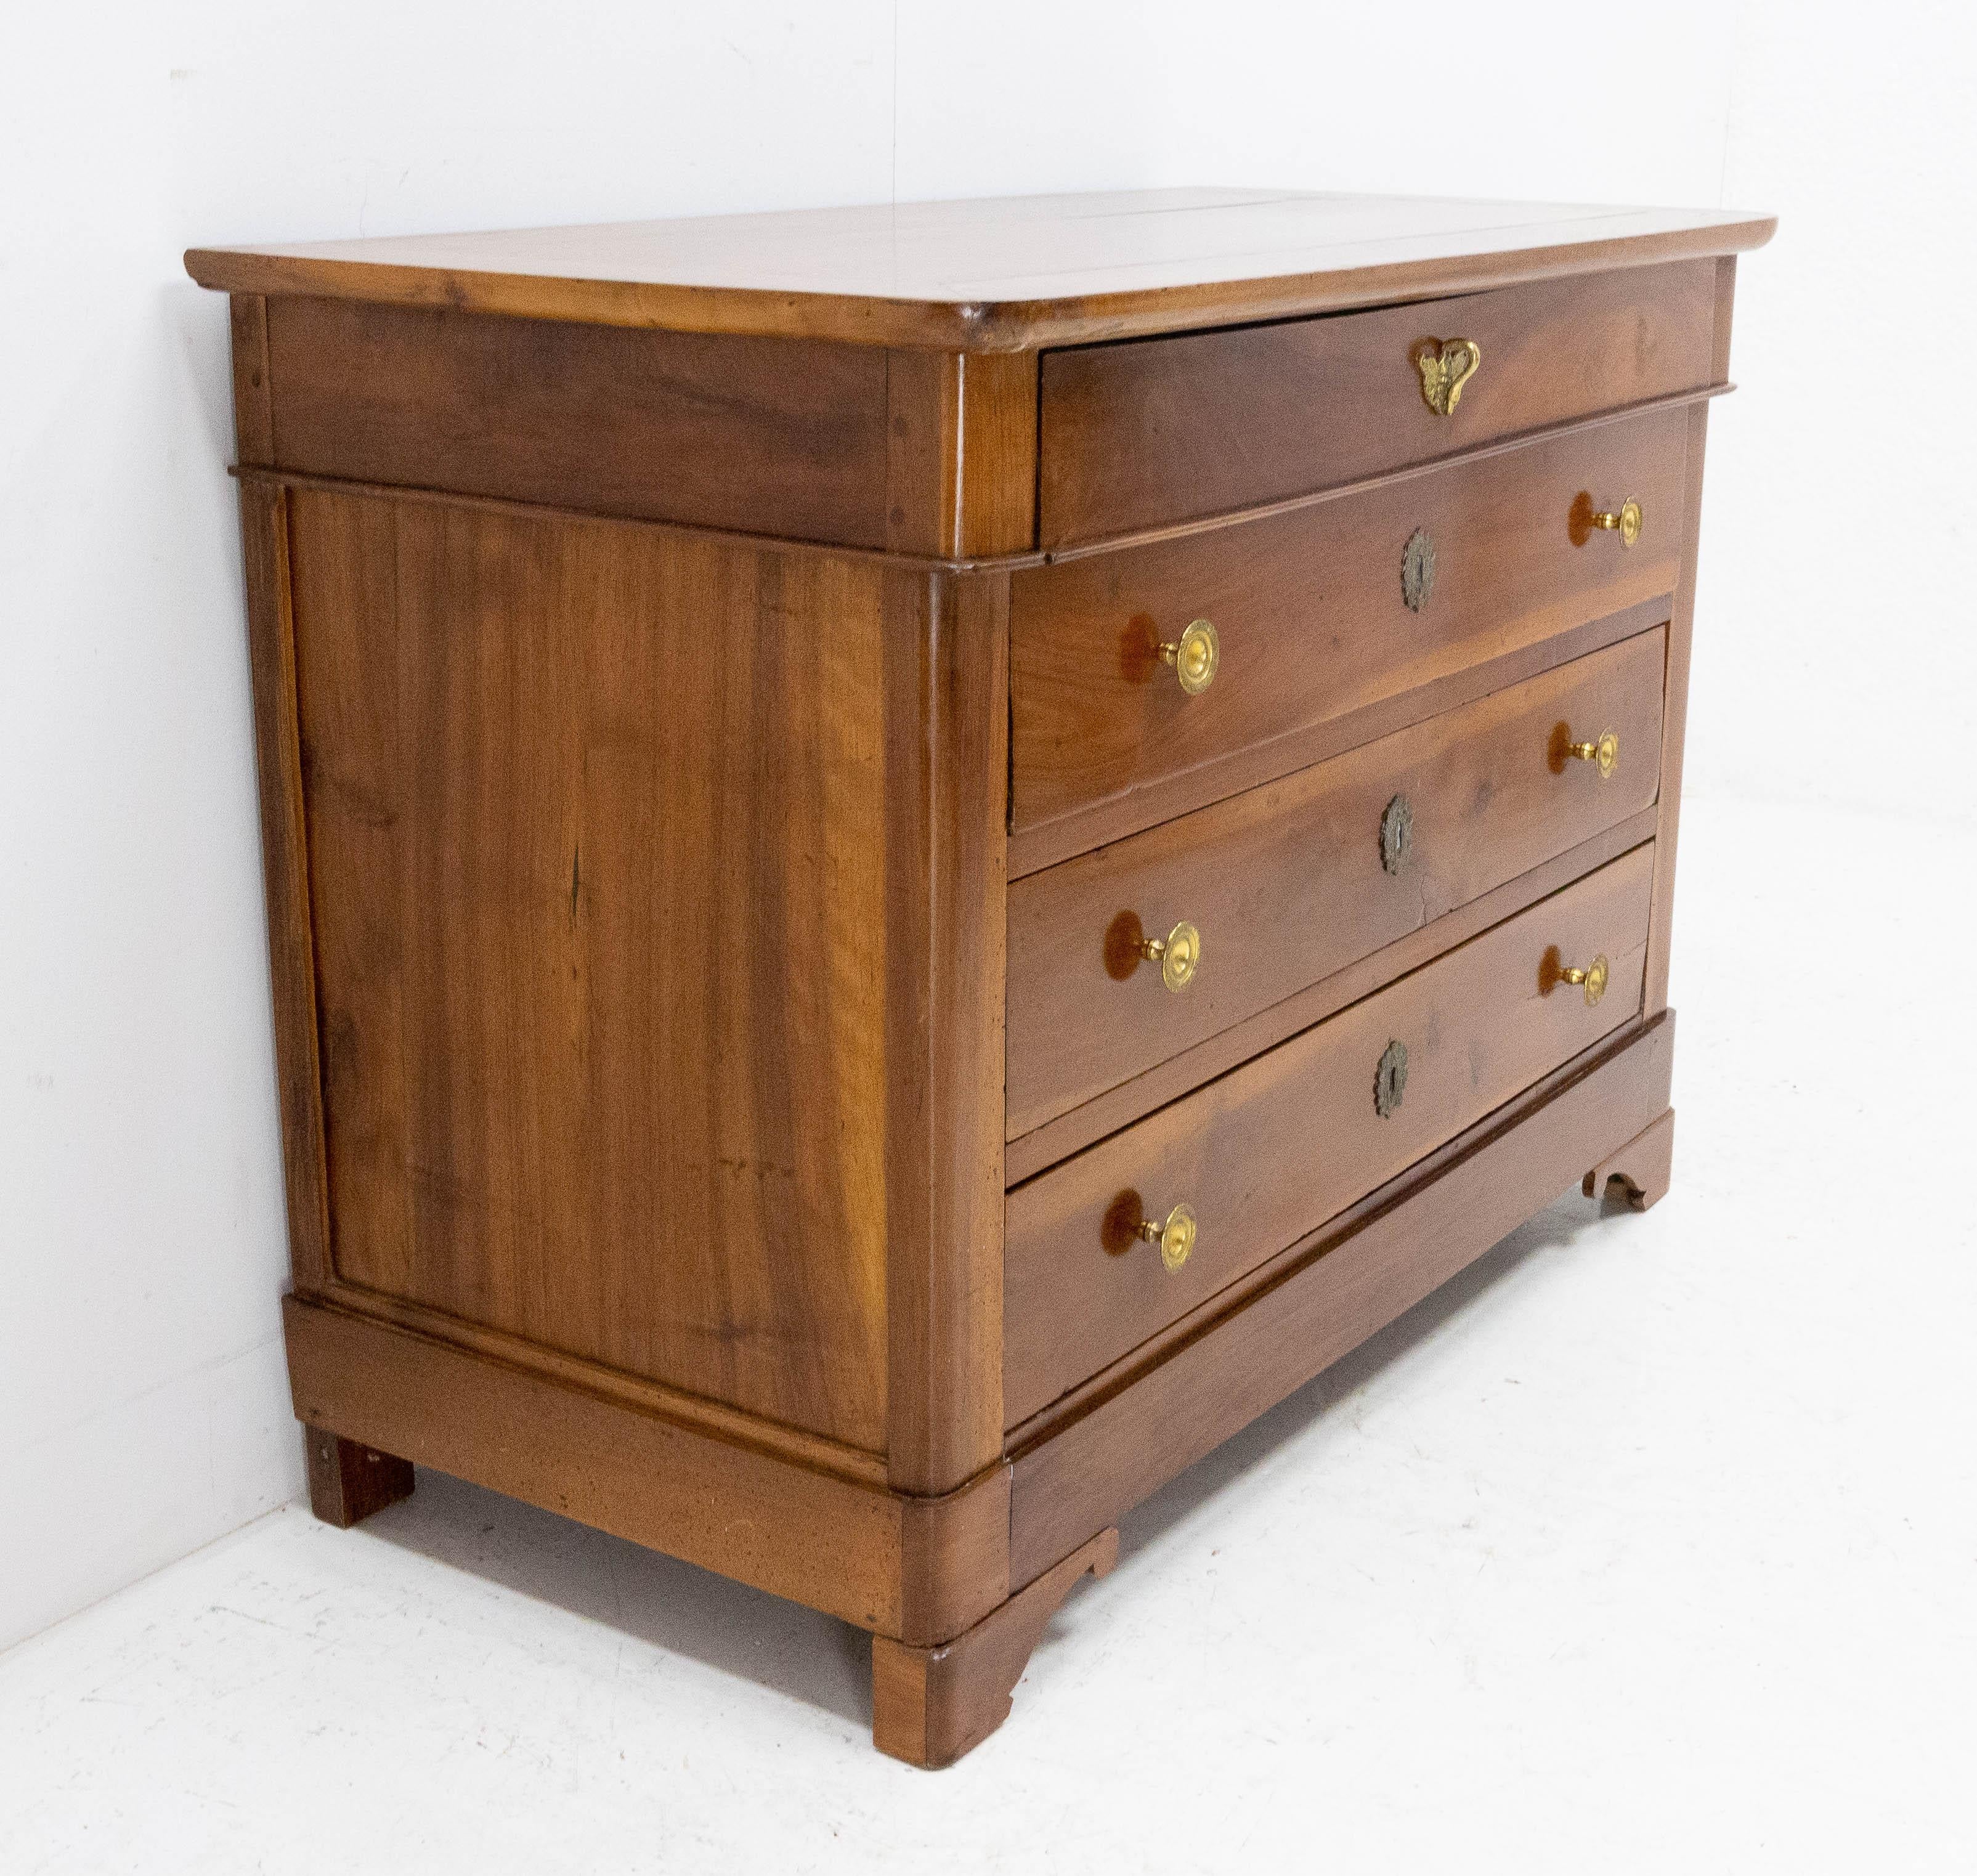 Early 19th Century French Empire Style Walnut Commode Chest of Drawers, circa 1820 For Sale